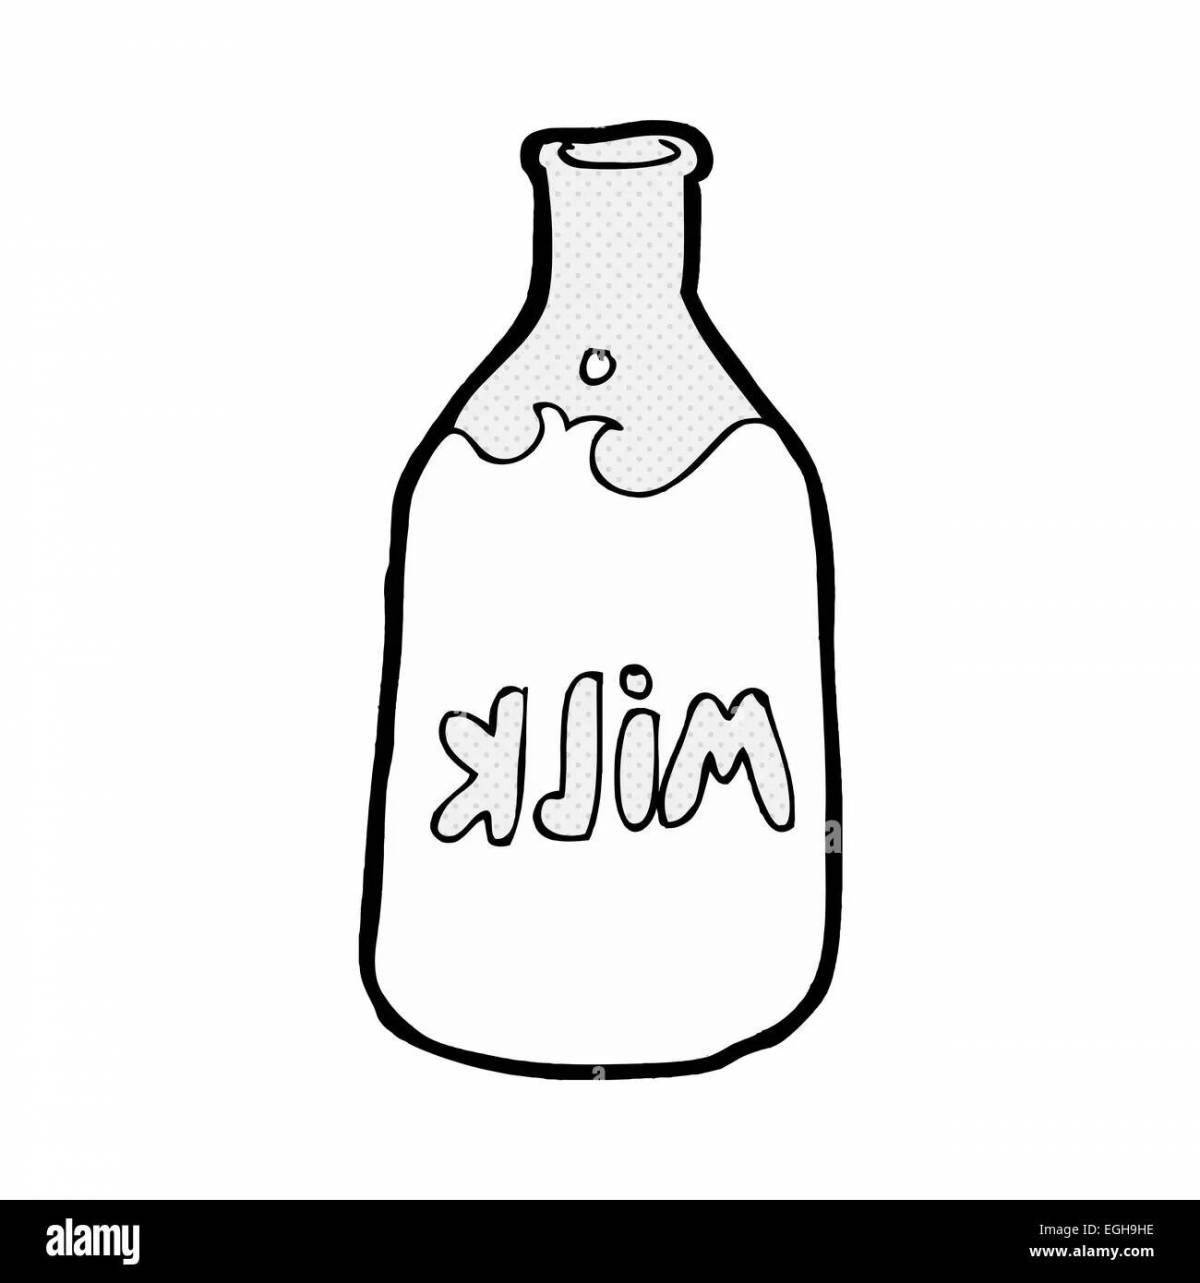 Sunny milk bottle coloring page